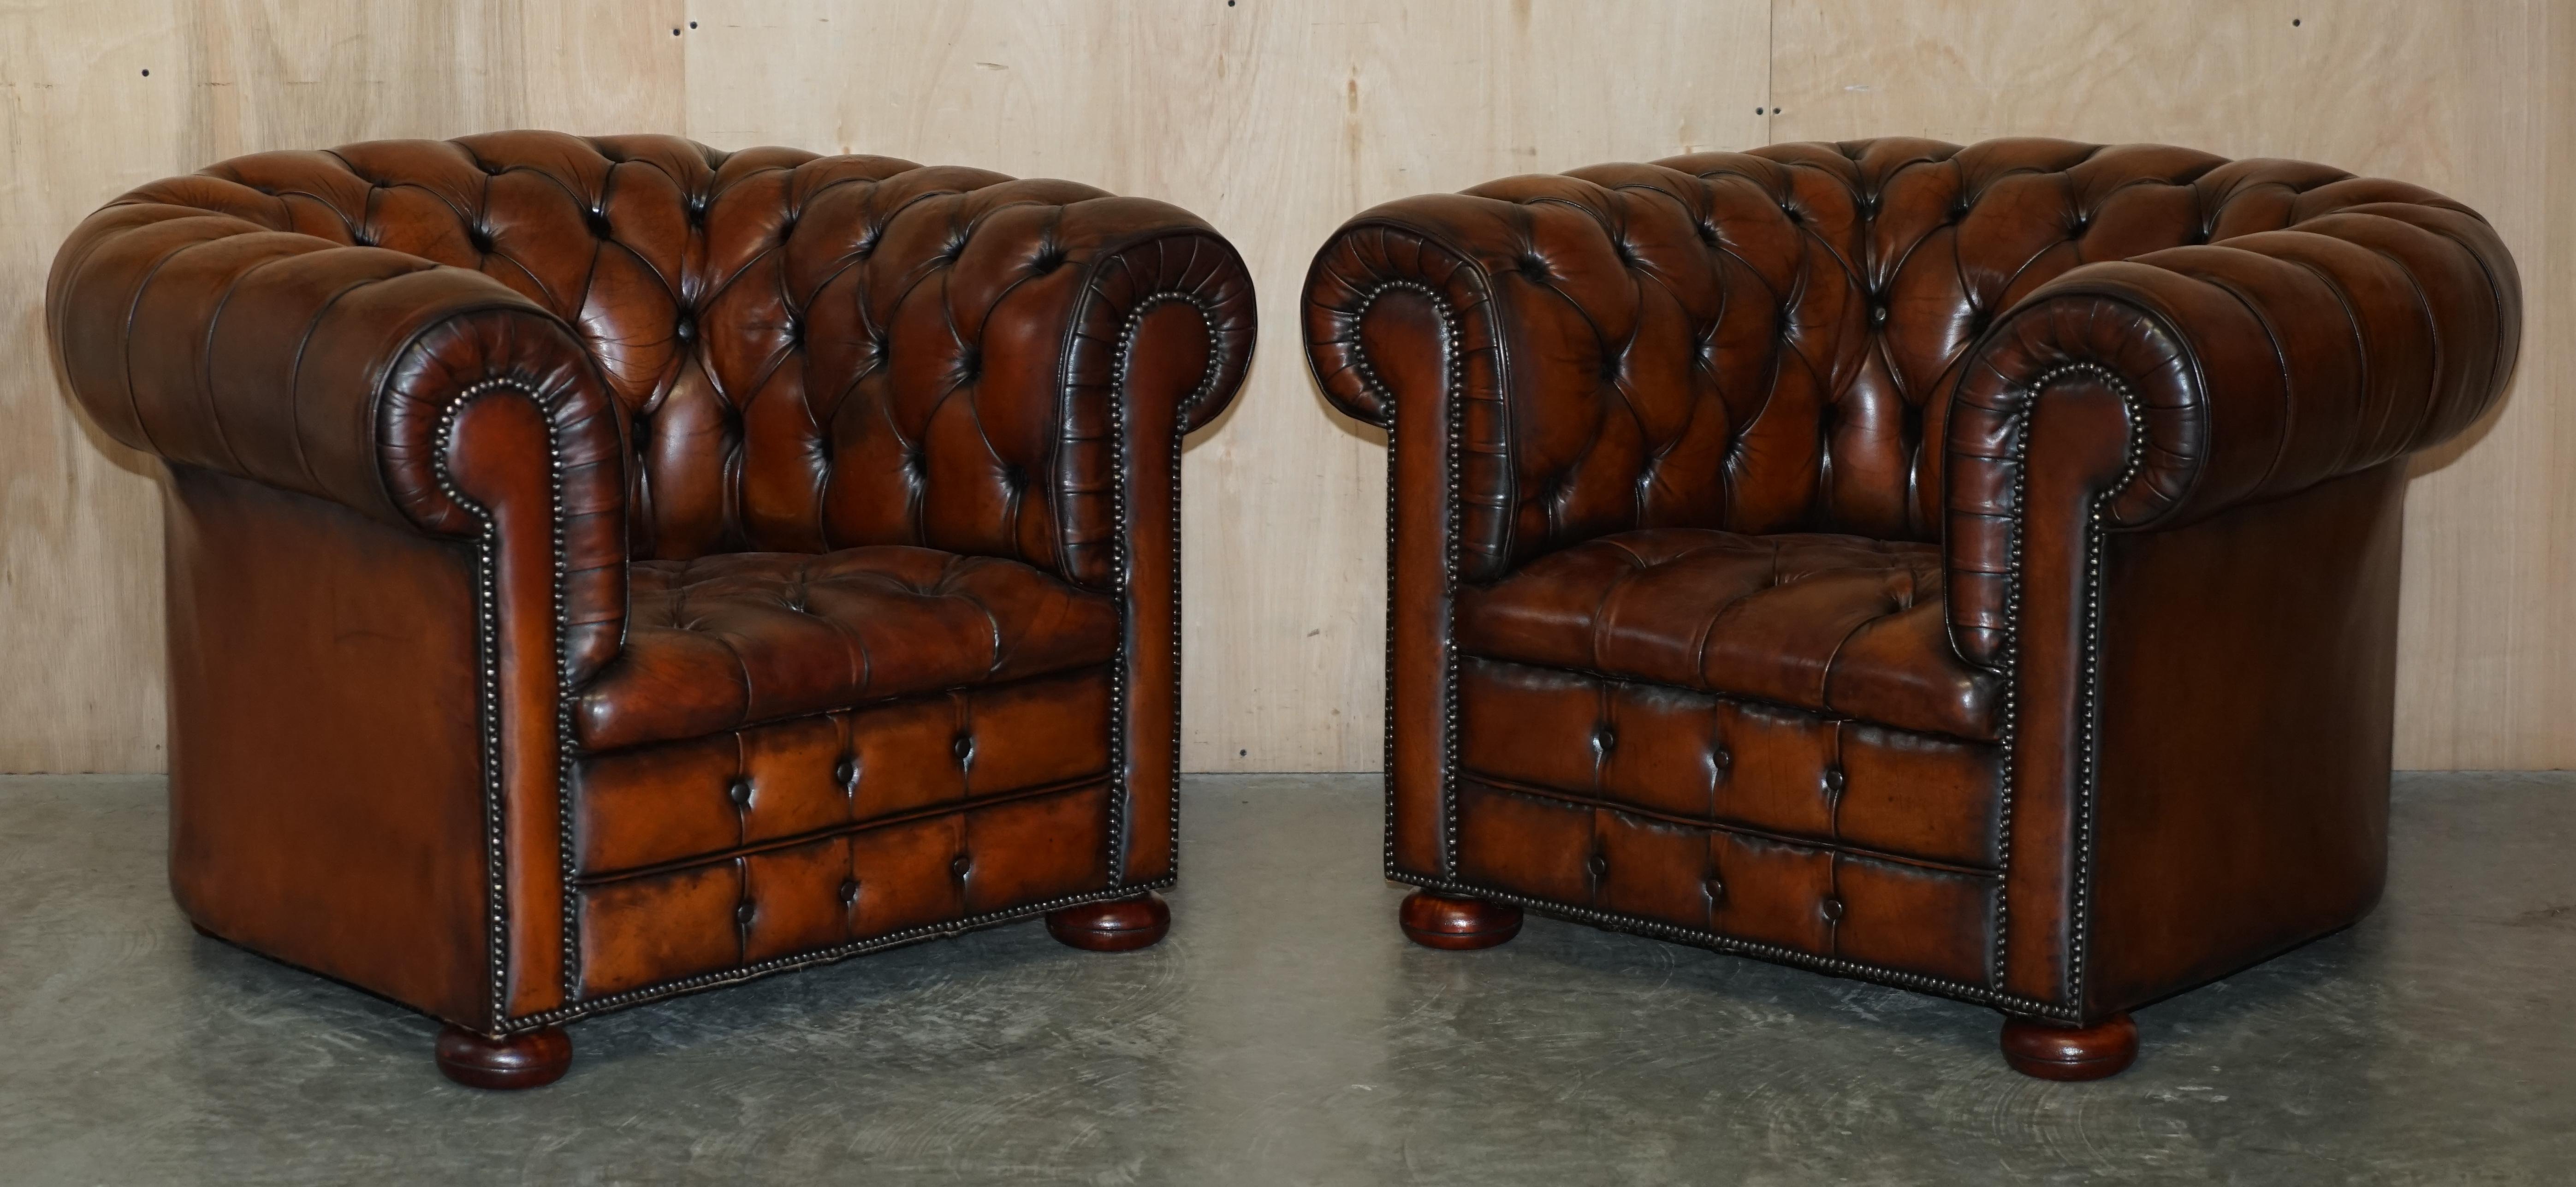 We are delighted to offer for sale this absolutely stunning pair of original circa 1930s Art Deco, super comfortable hand dyed saddle brown leather club armchairs and footstools with Chesterfield tufting

Please note the delivery fee listed is